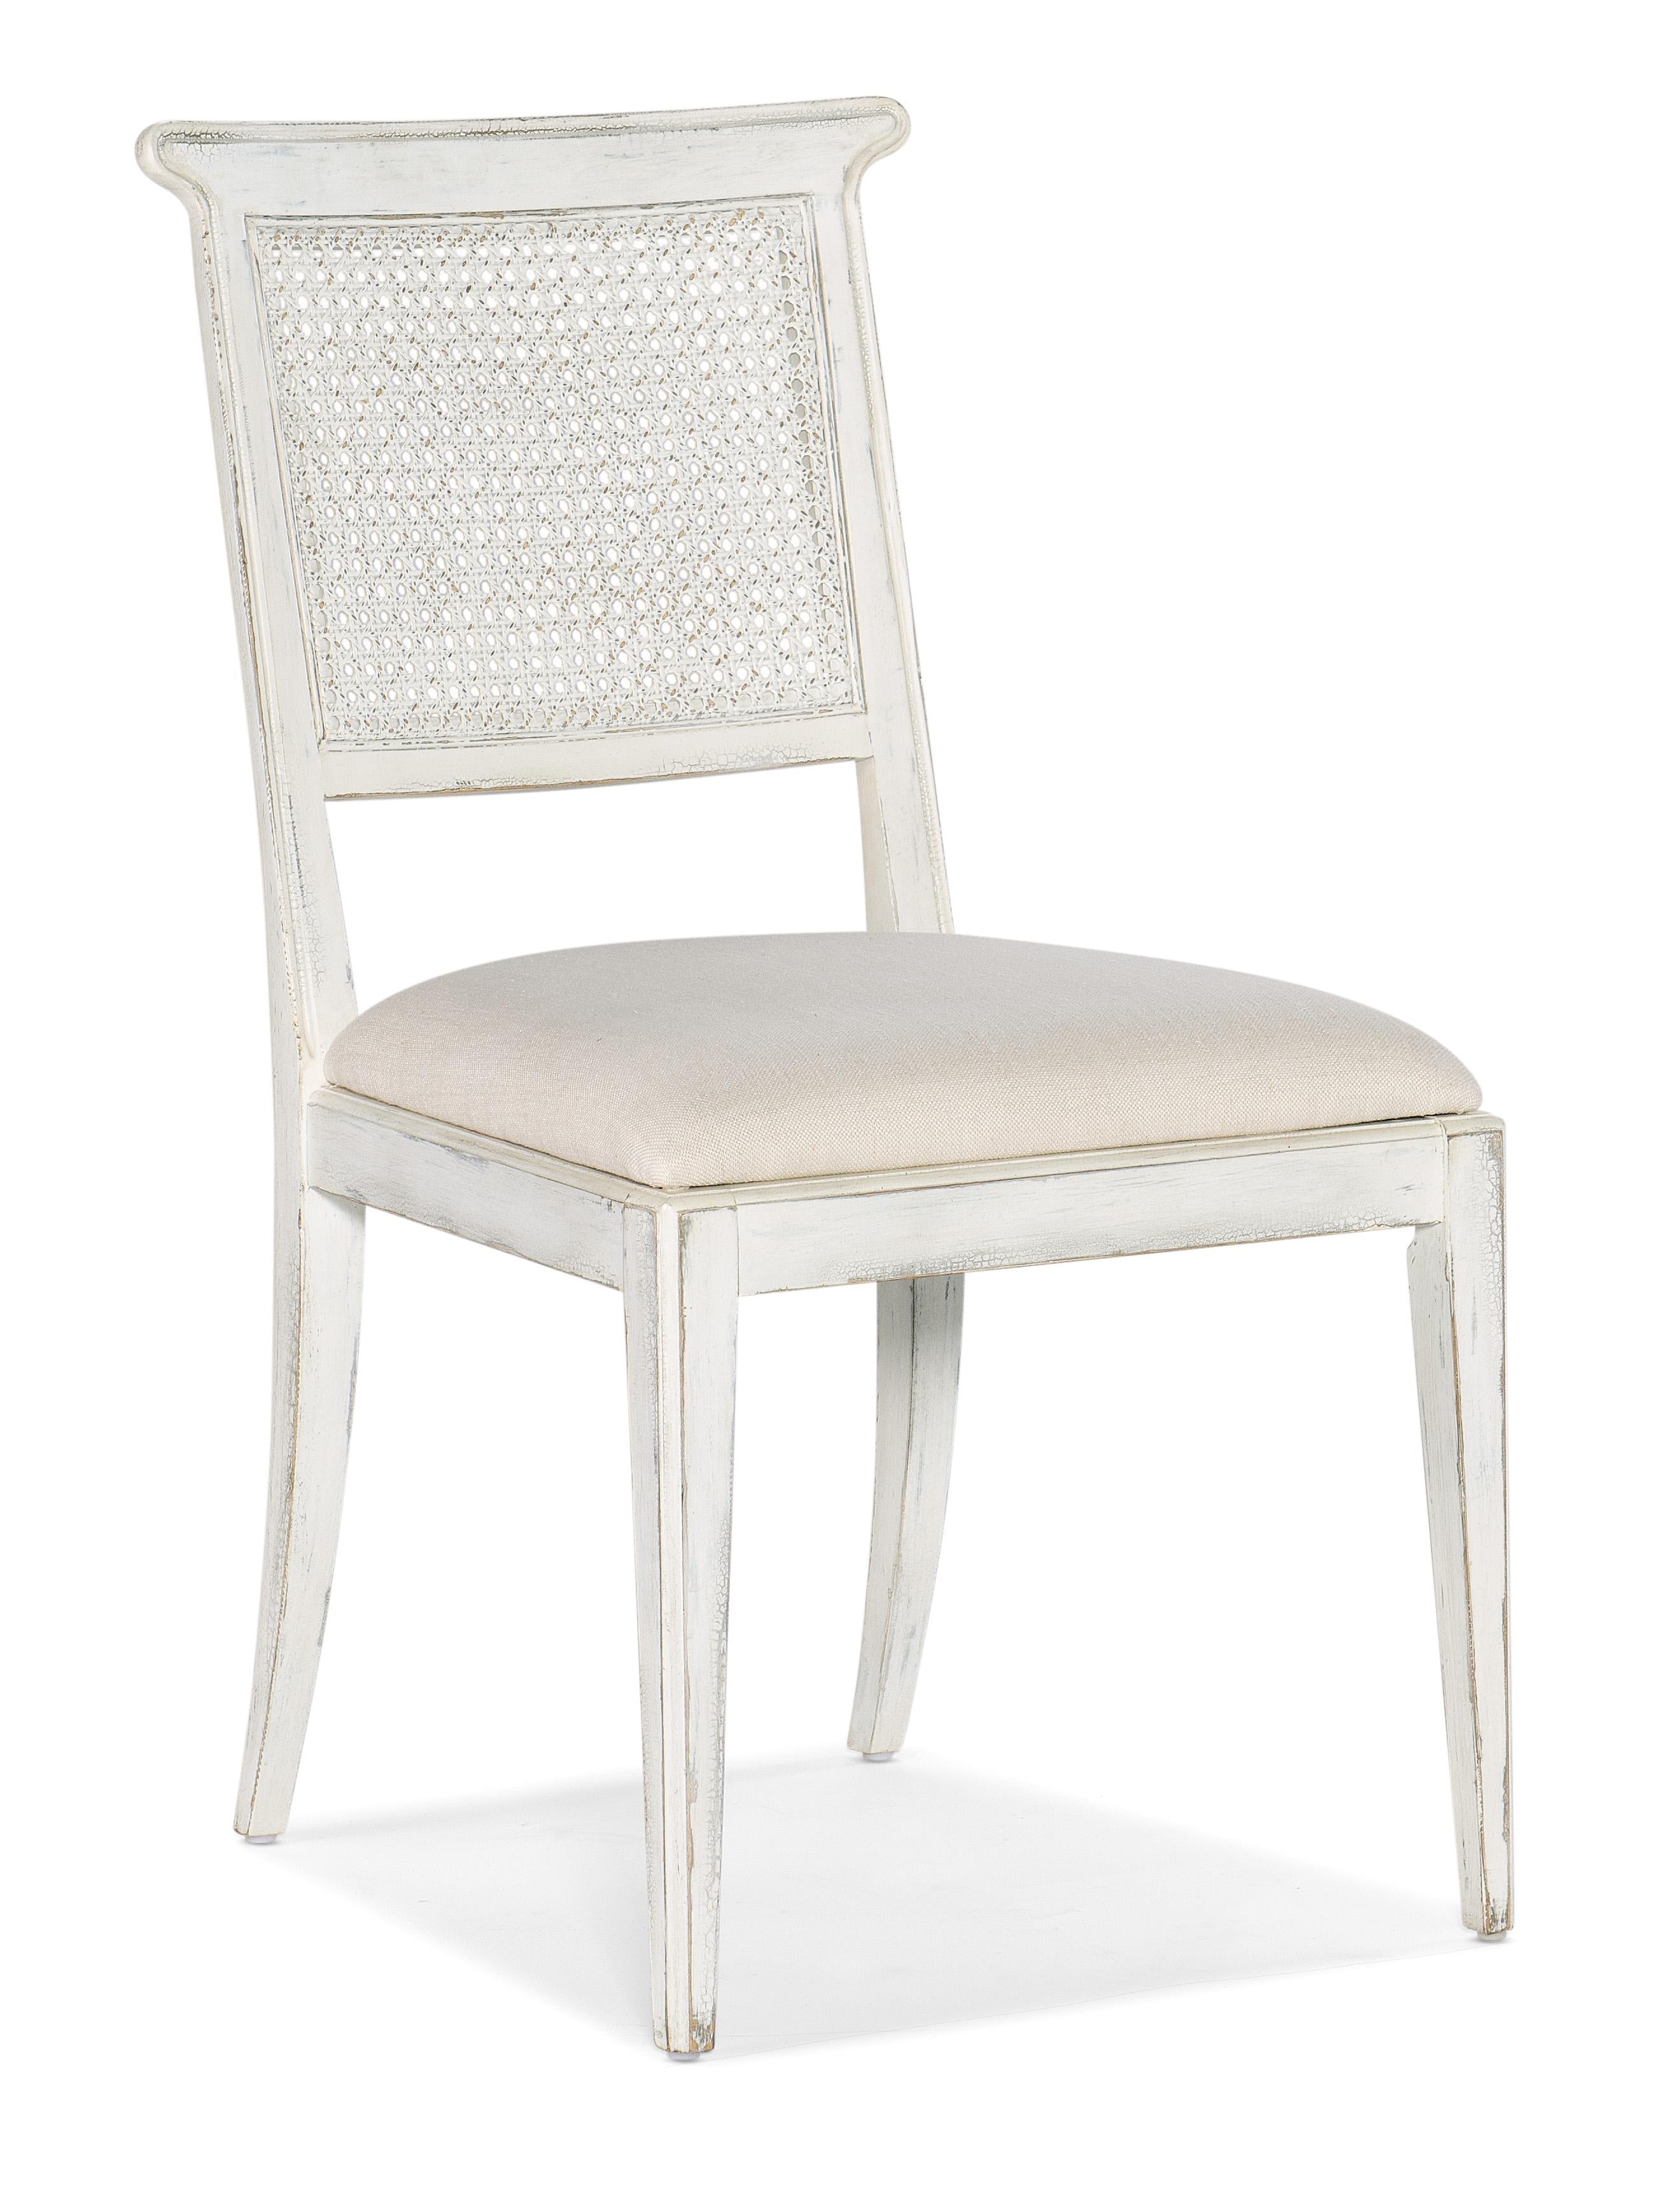 Charleston Upholstered Seat Side Chair-2 per carton/price ea - 6750-75410-05